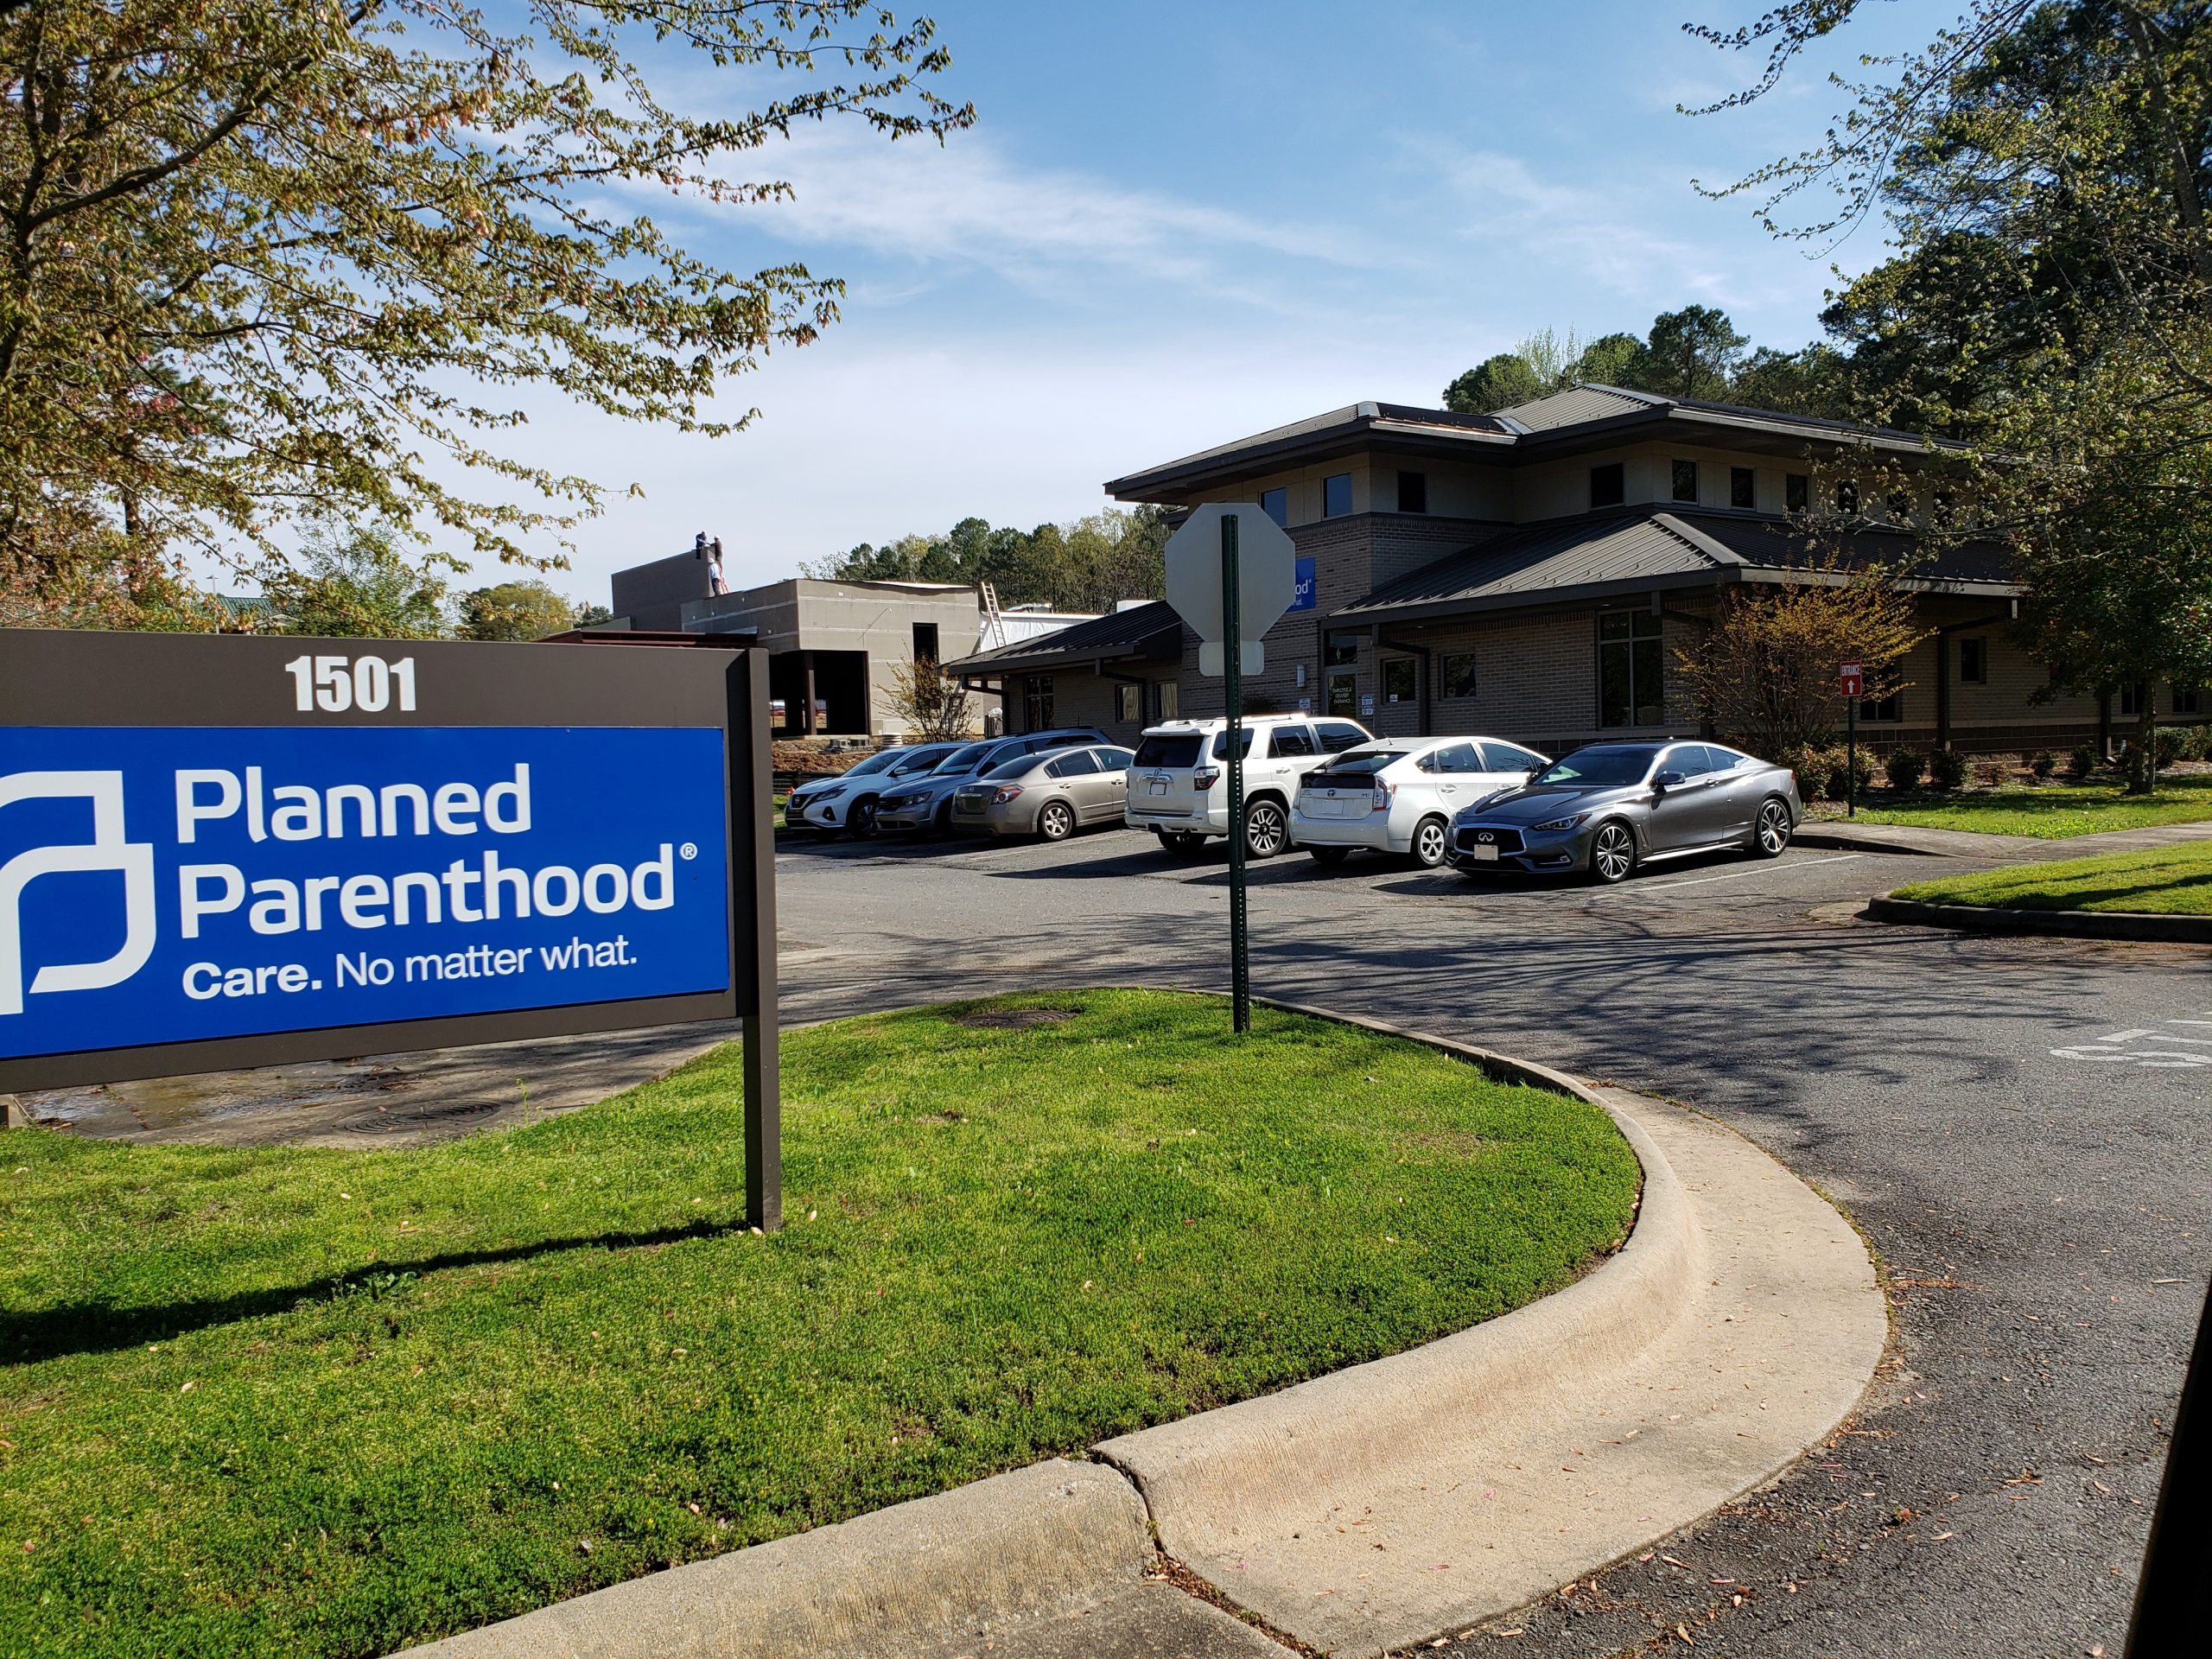 Planned Parenthood’s PAC Shows Little Activity For Now